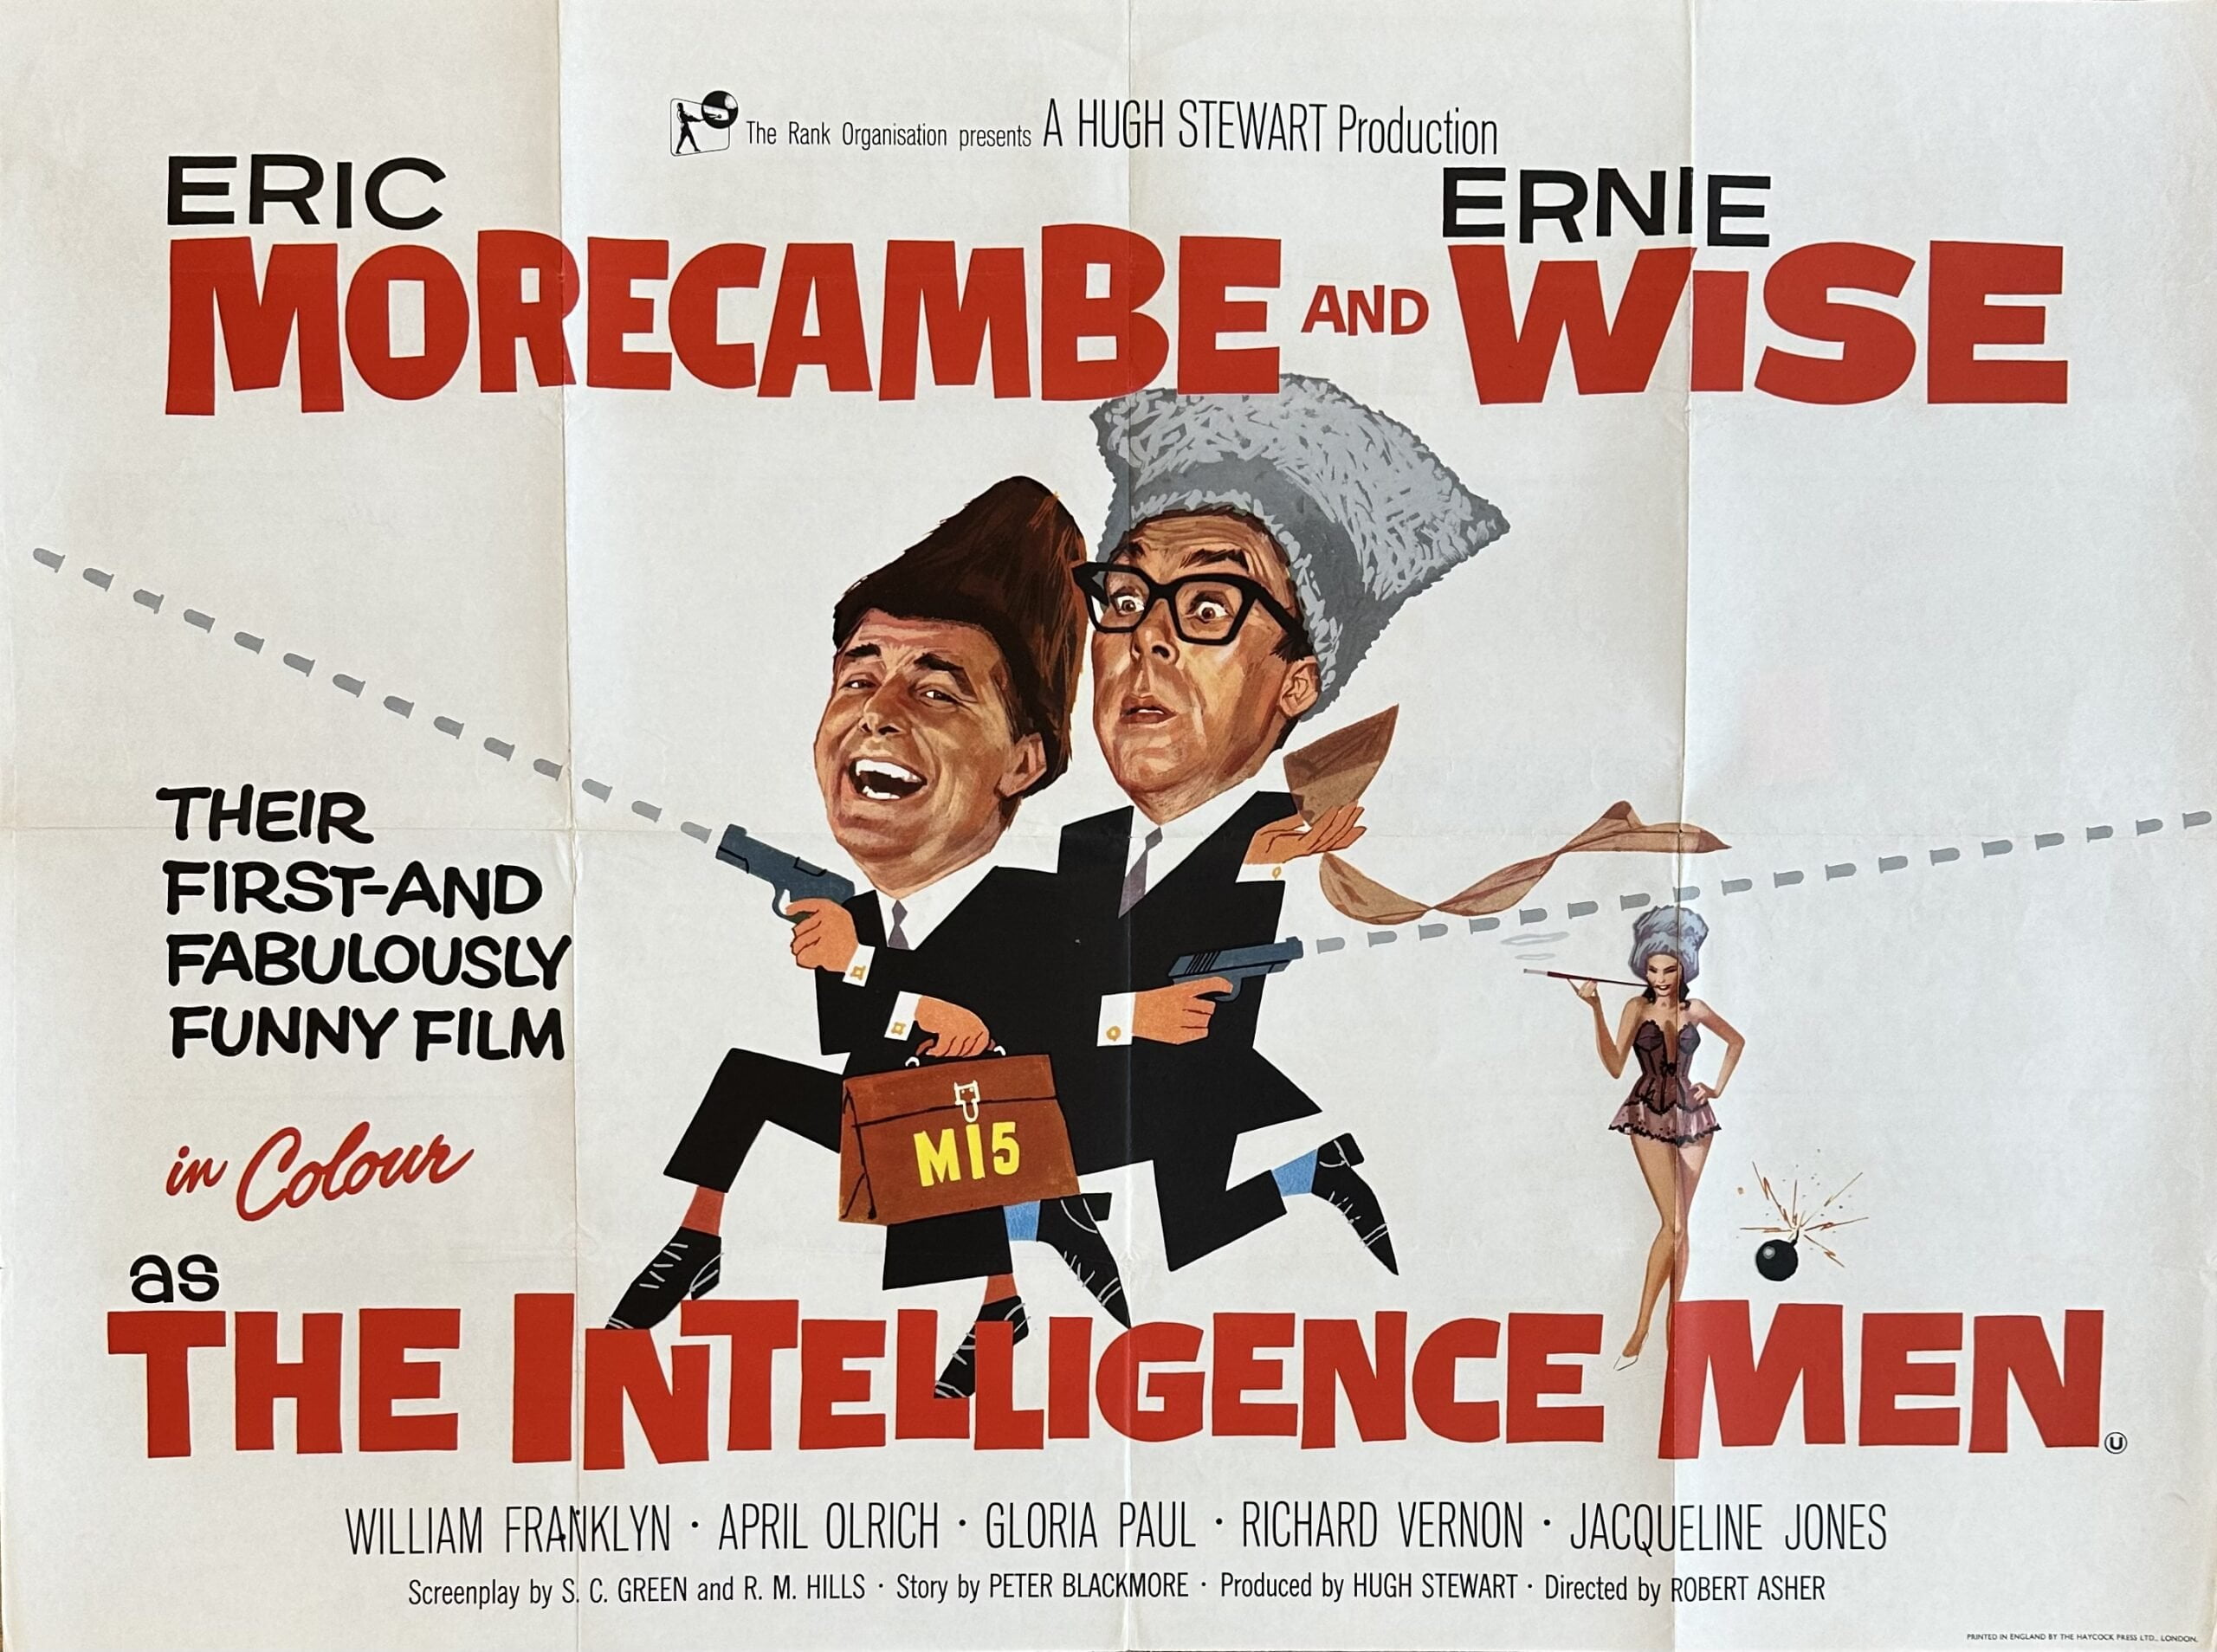 Original vintage cinema movie poster for the Morecambe and Wise comedy, The Intelligence Men